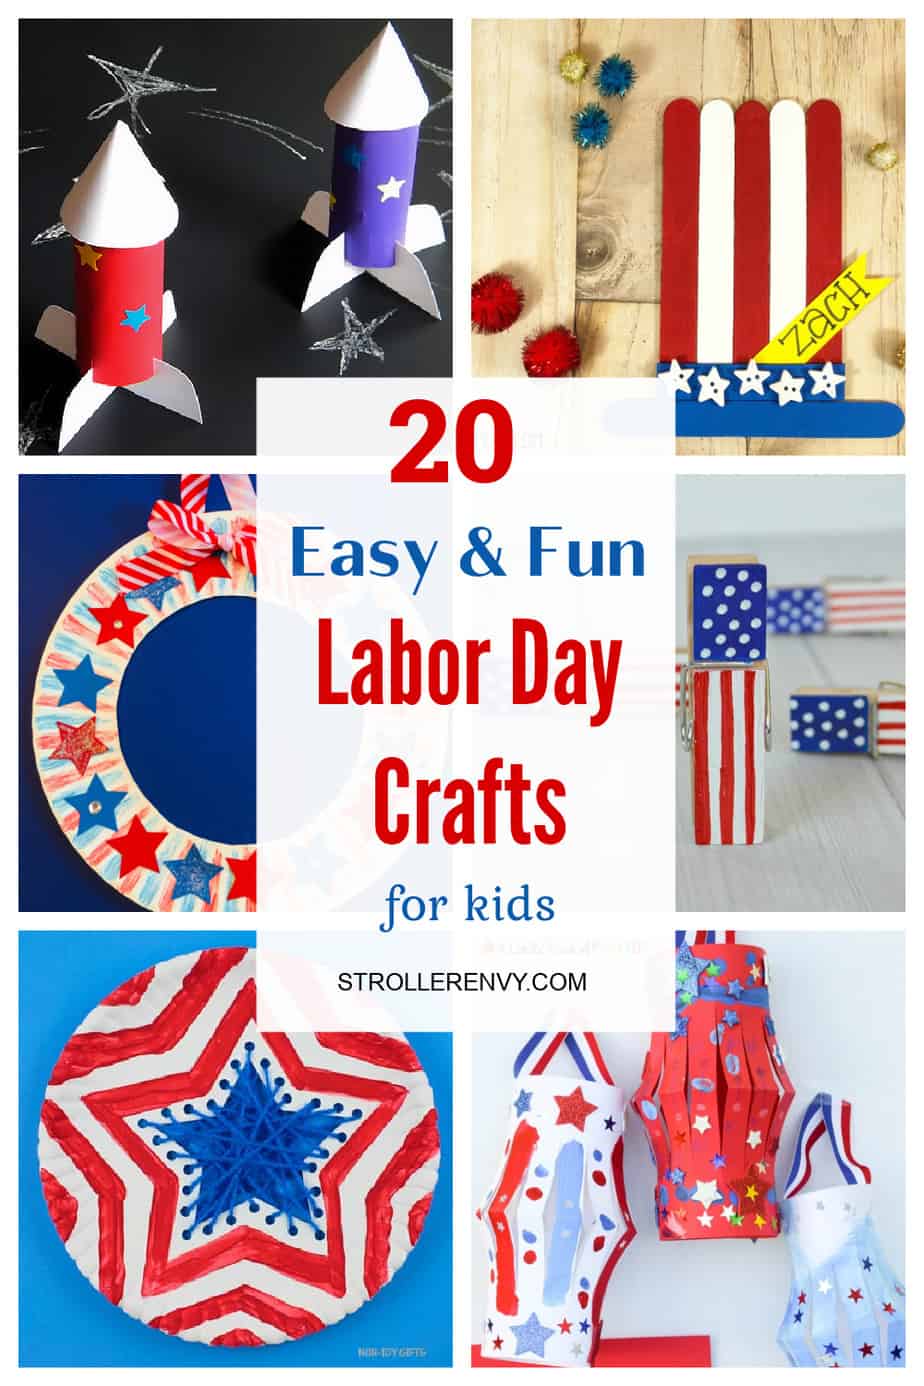 Labor Day Crafts for Kids 